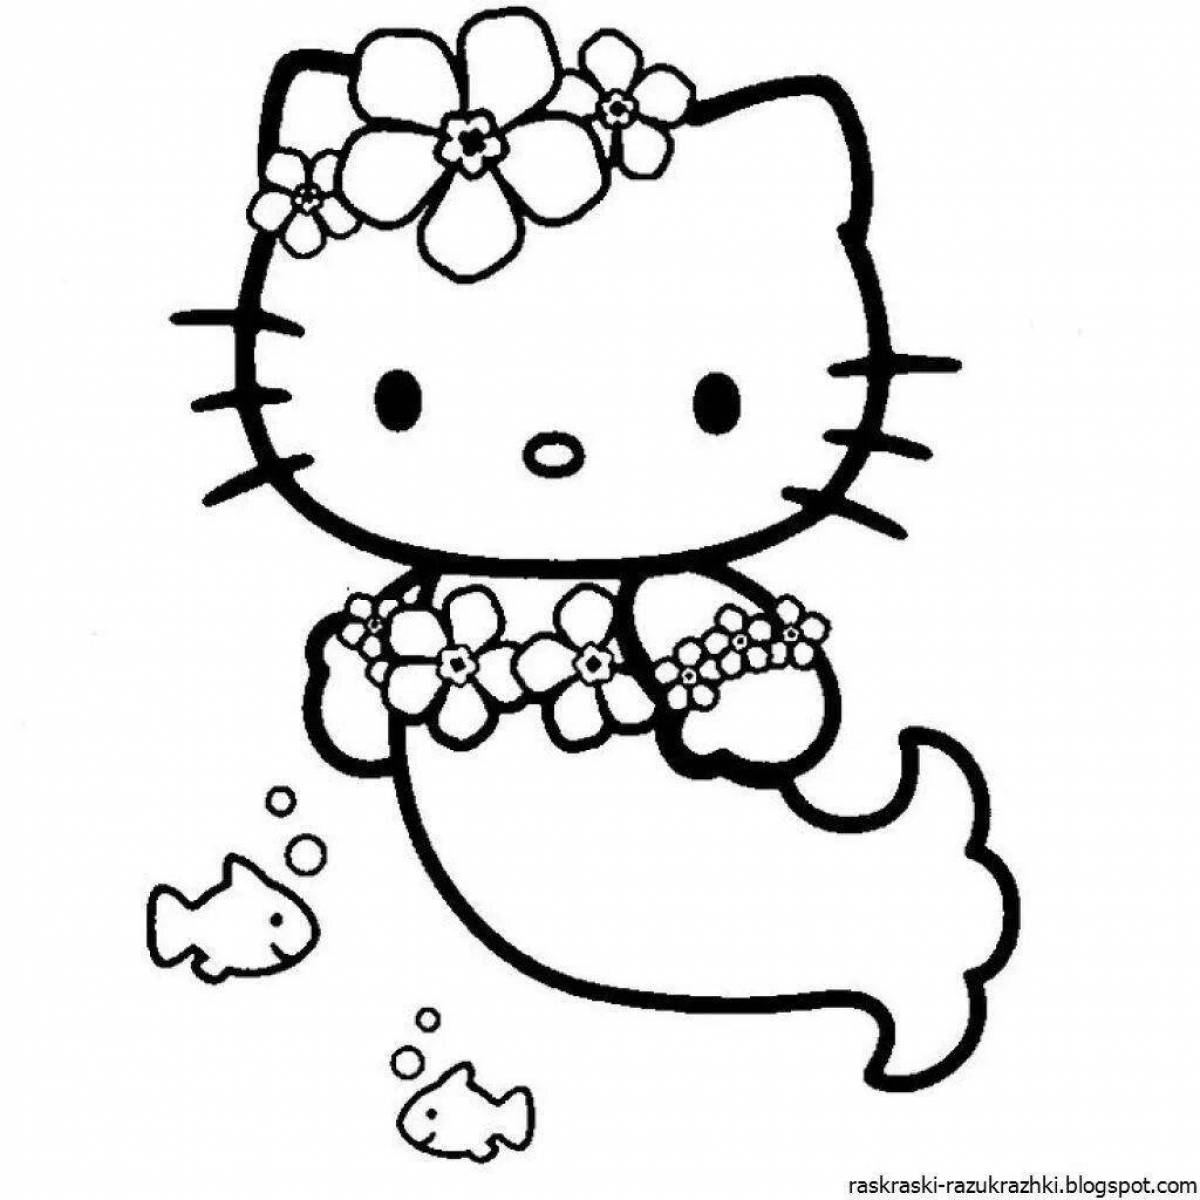 Exquisite hello kitty coloring game